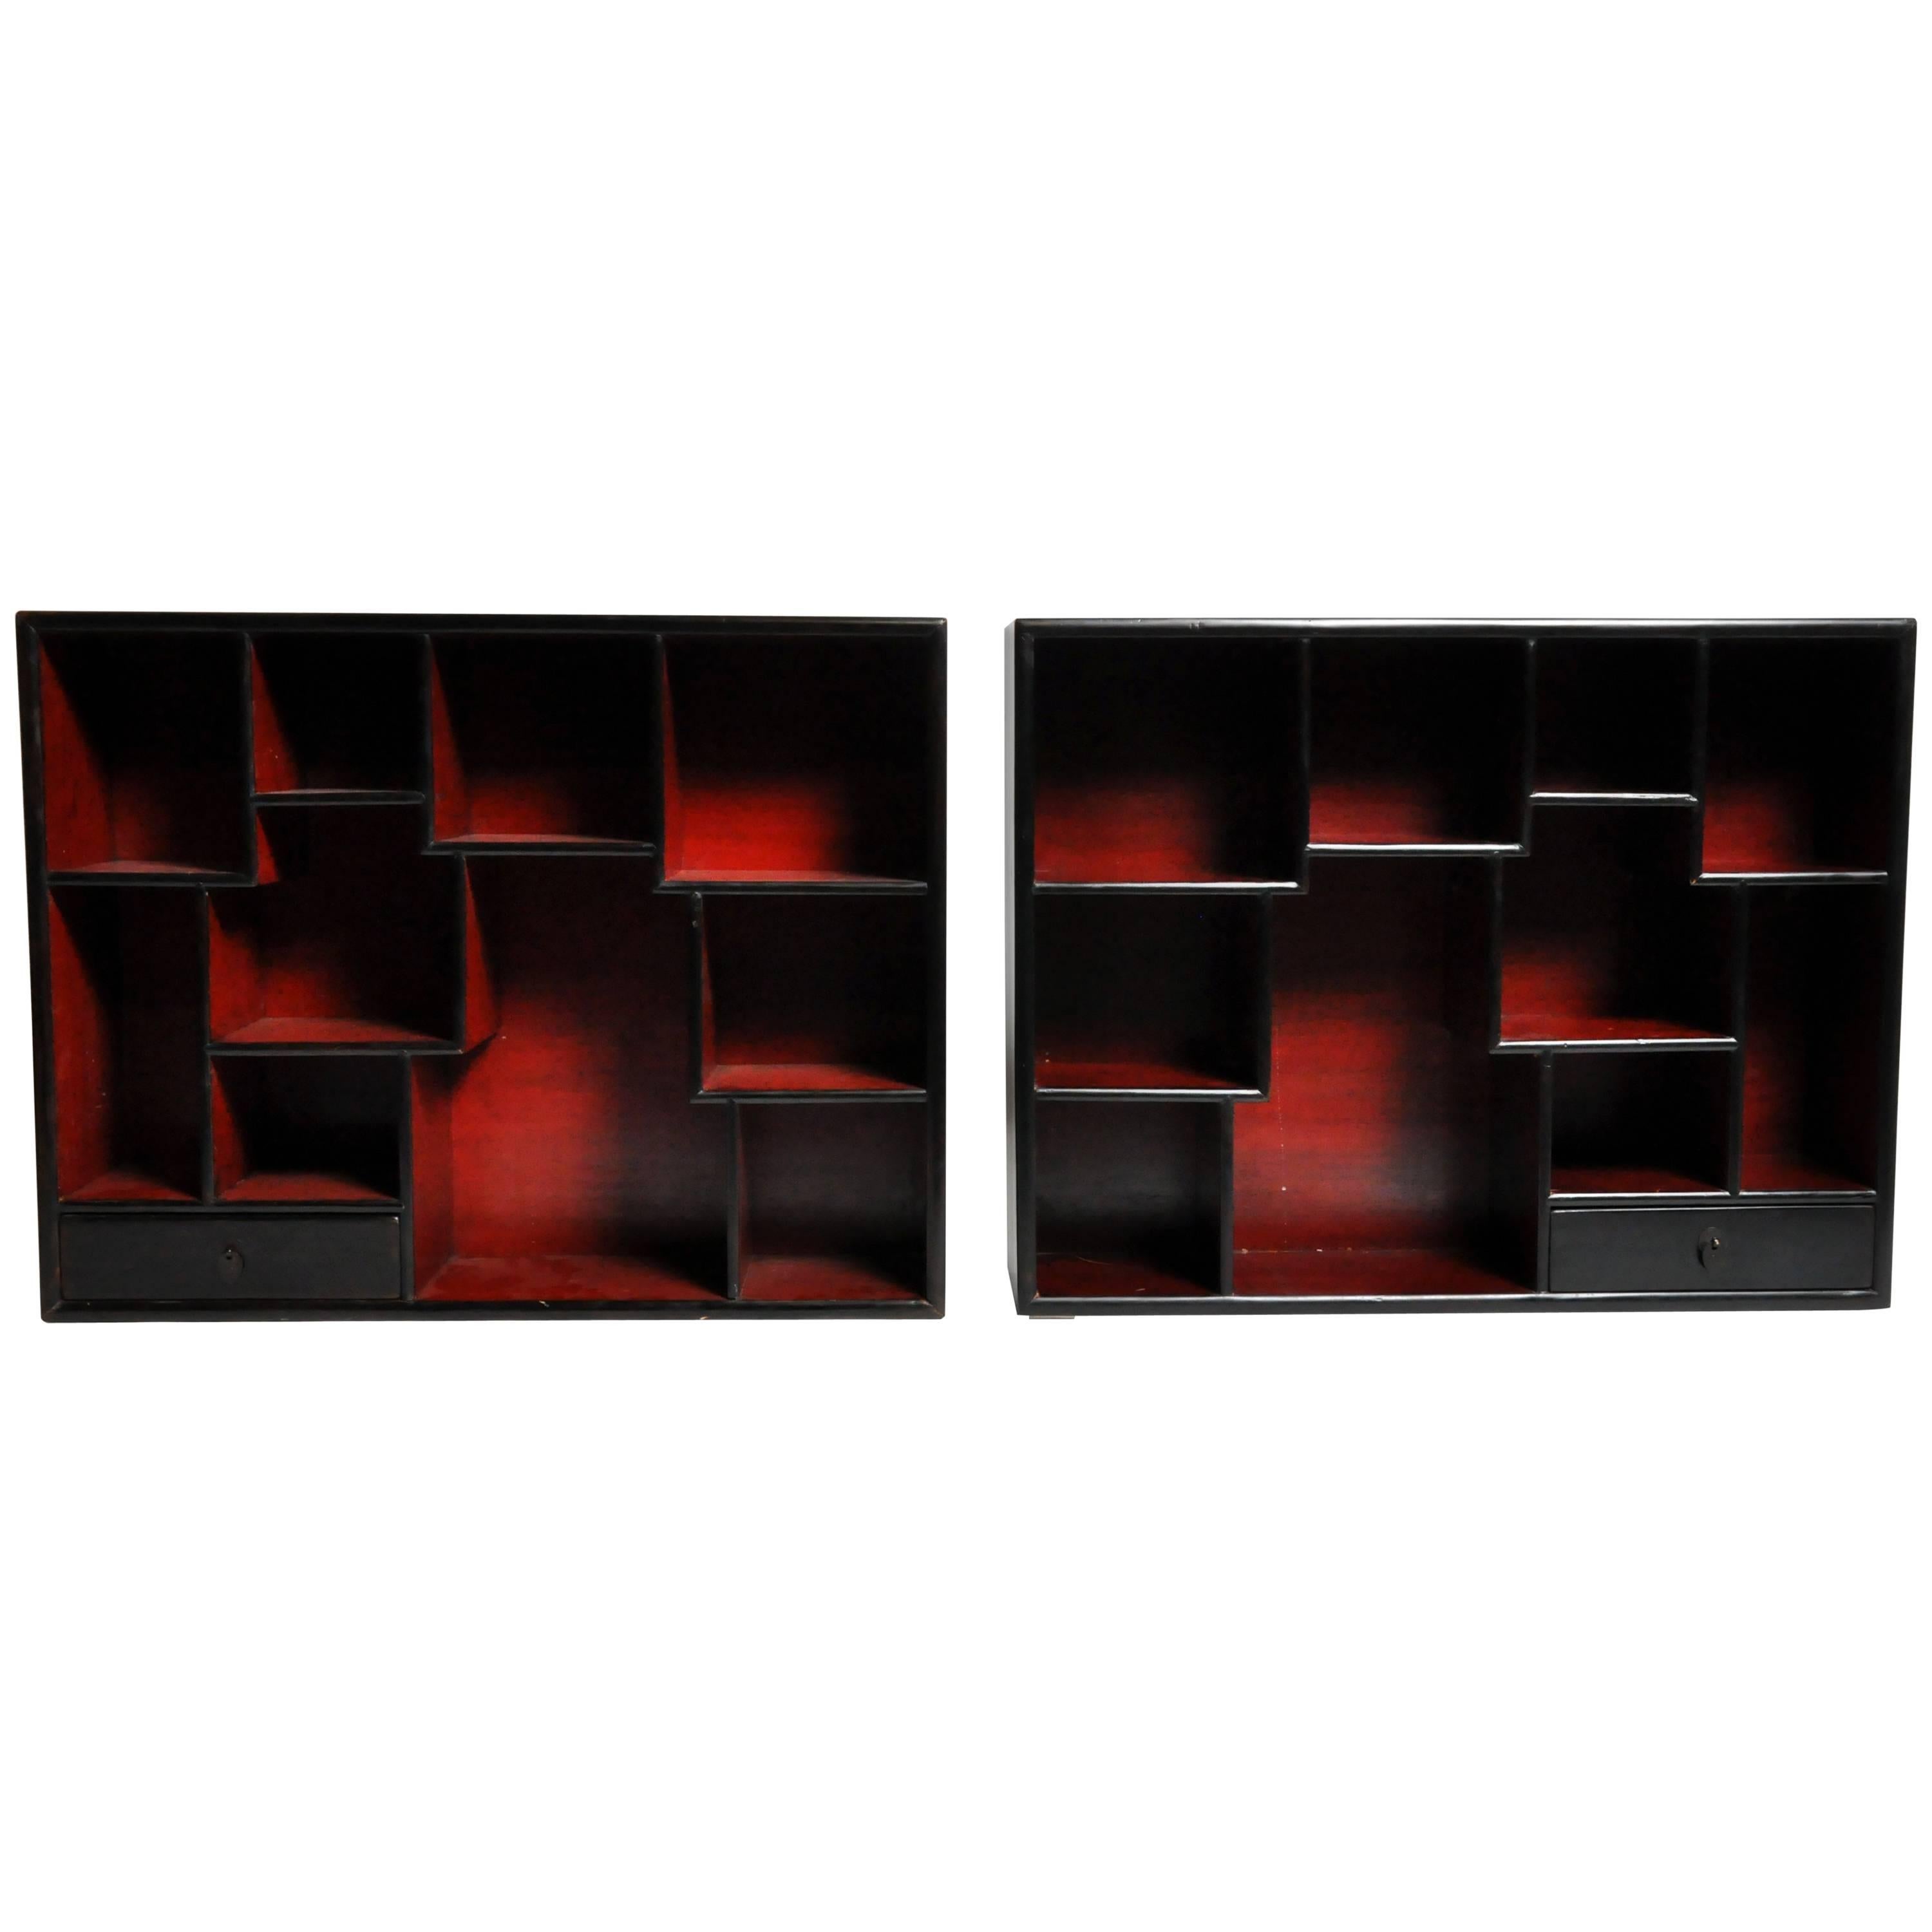 Pair of Lacquered Chinese Book Shelf Cabinets with One Drawer